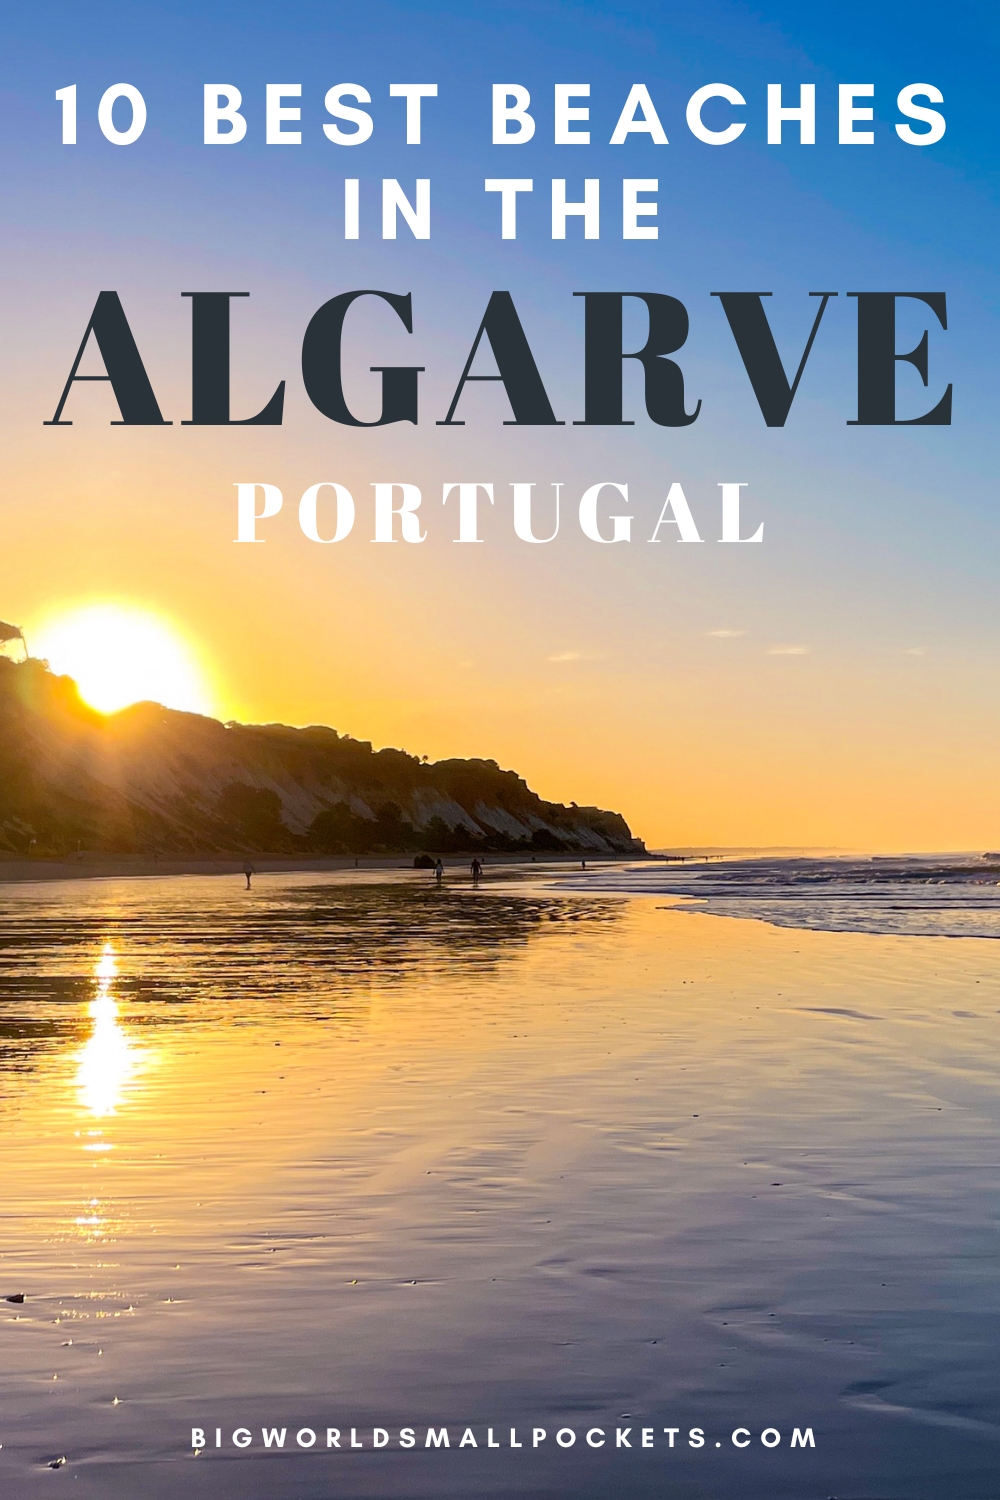 10 Best Beaches in the Algarve, Portugal